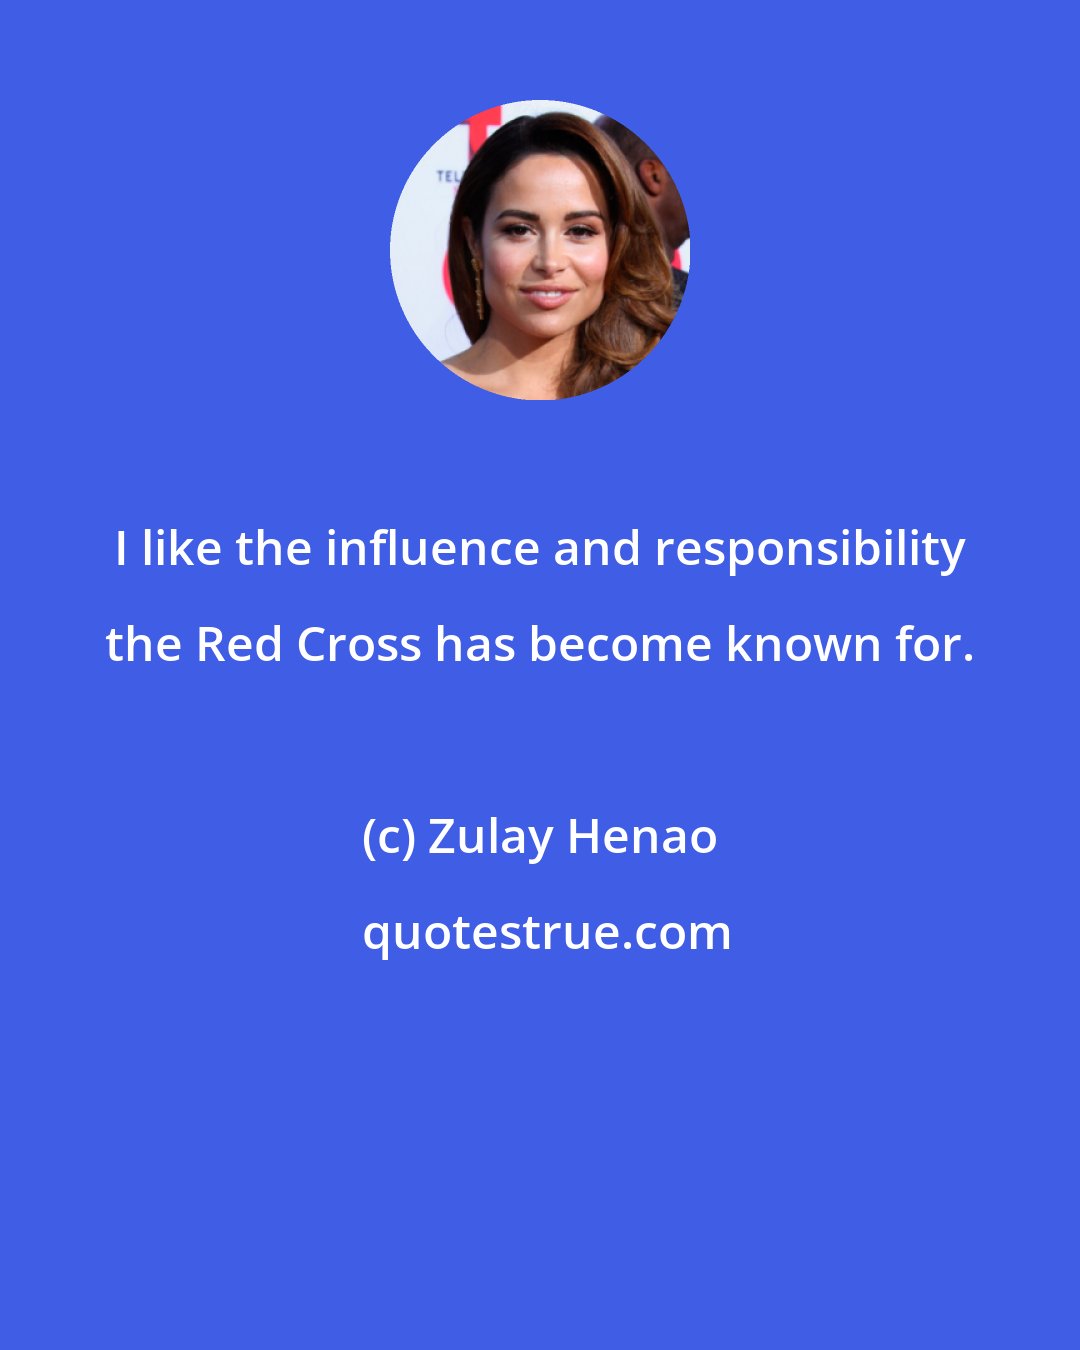 Zulay Henao: I like the influence and responsibility the Red Cross has become known for.